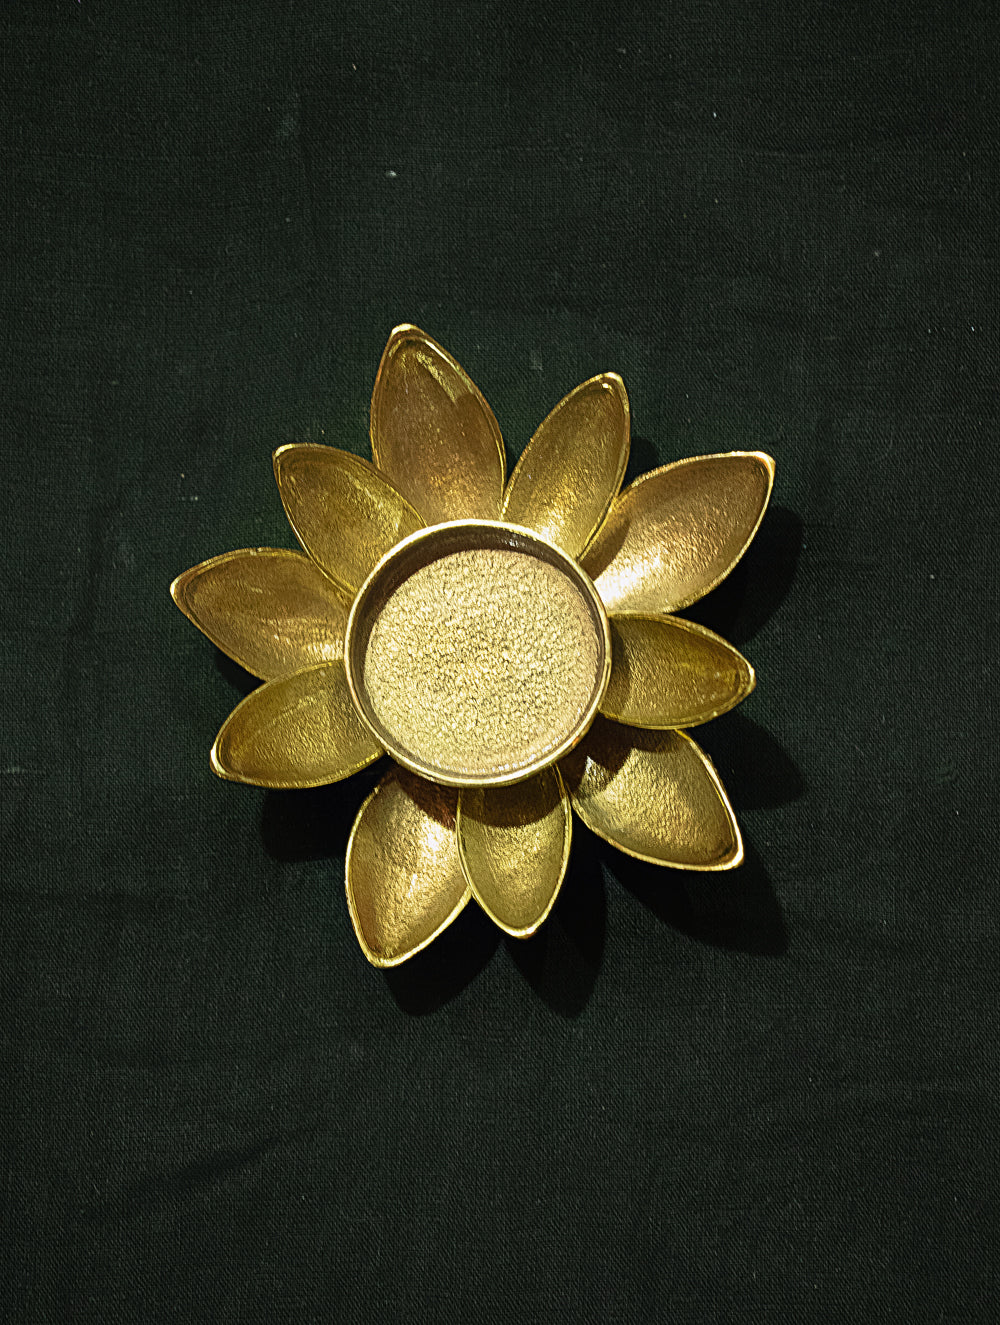 Load image into Gallery viewer, Brass Lotus Tealight Holder (Small) - The India Craft House 